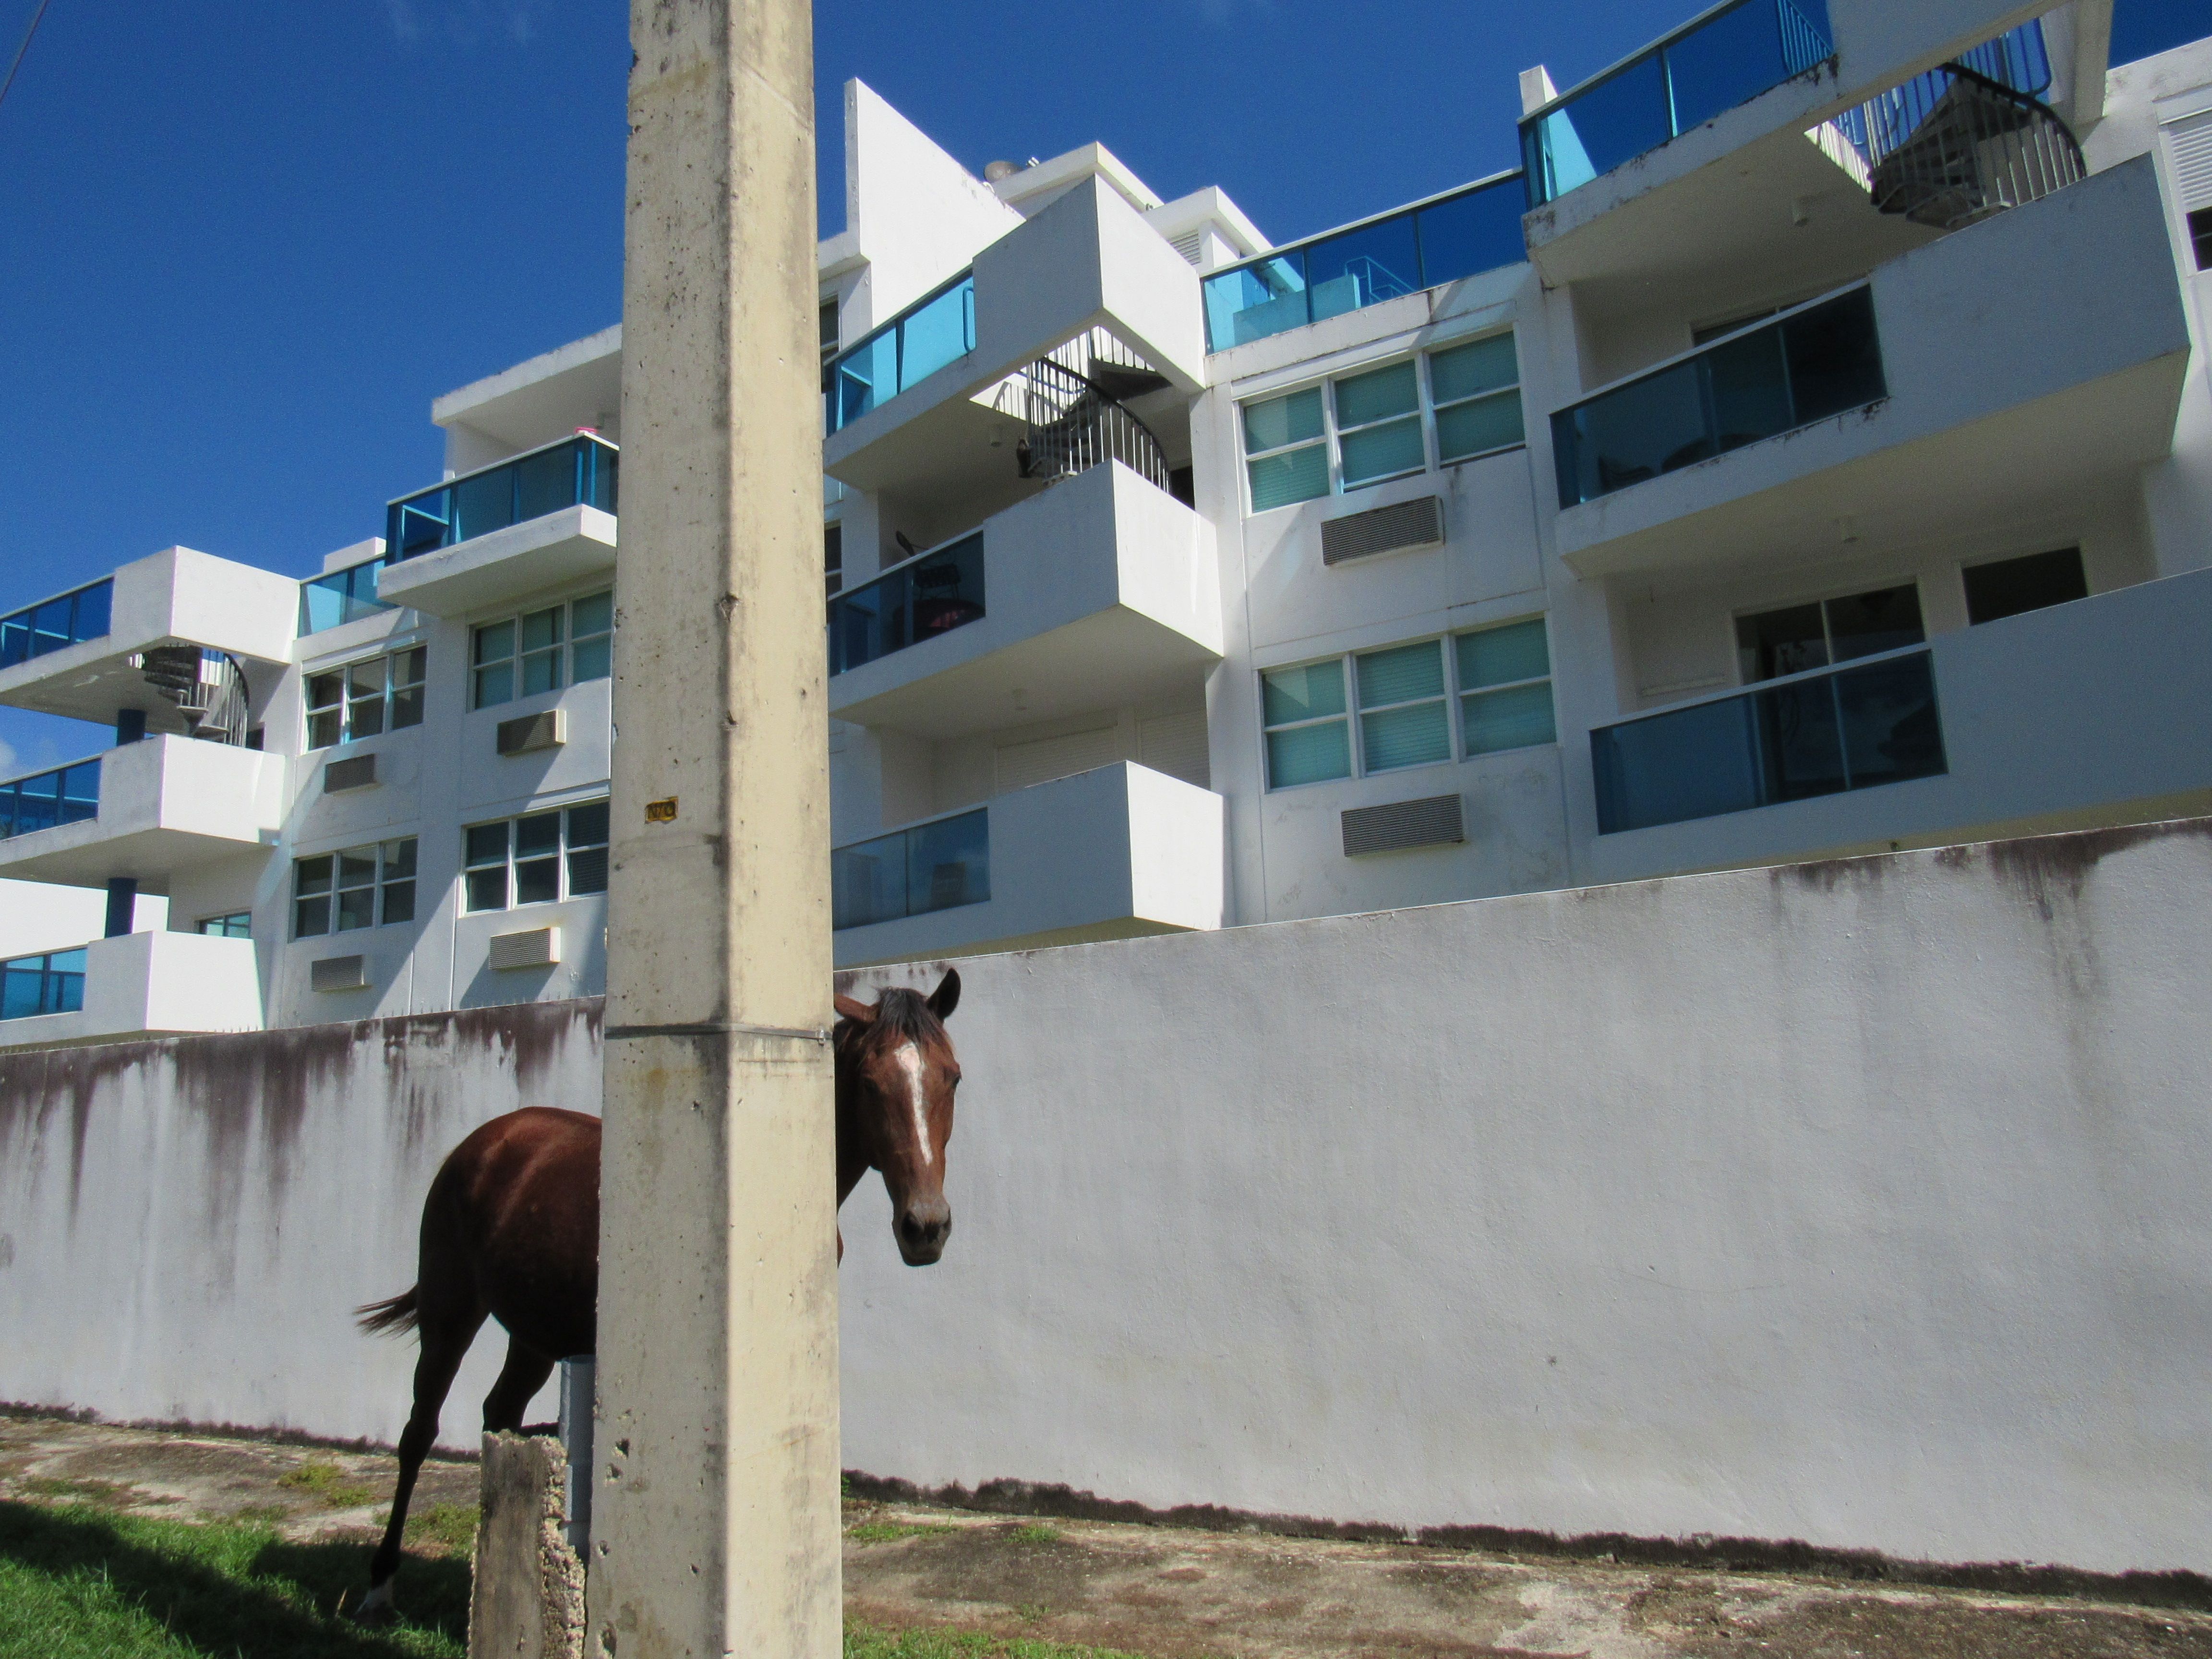 In Loiza many loiceños own horses. Many times owners will take their horses to eat grass in the overgrown lots near the condominiums. Image by Isabel Sophia Dieppa. United States, 2018.